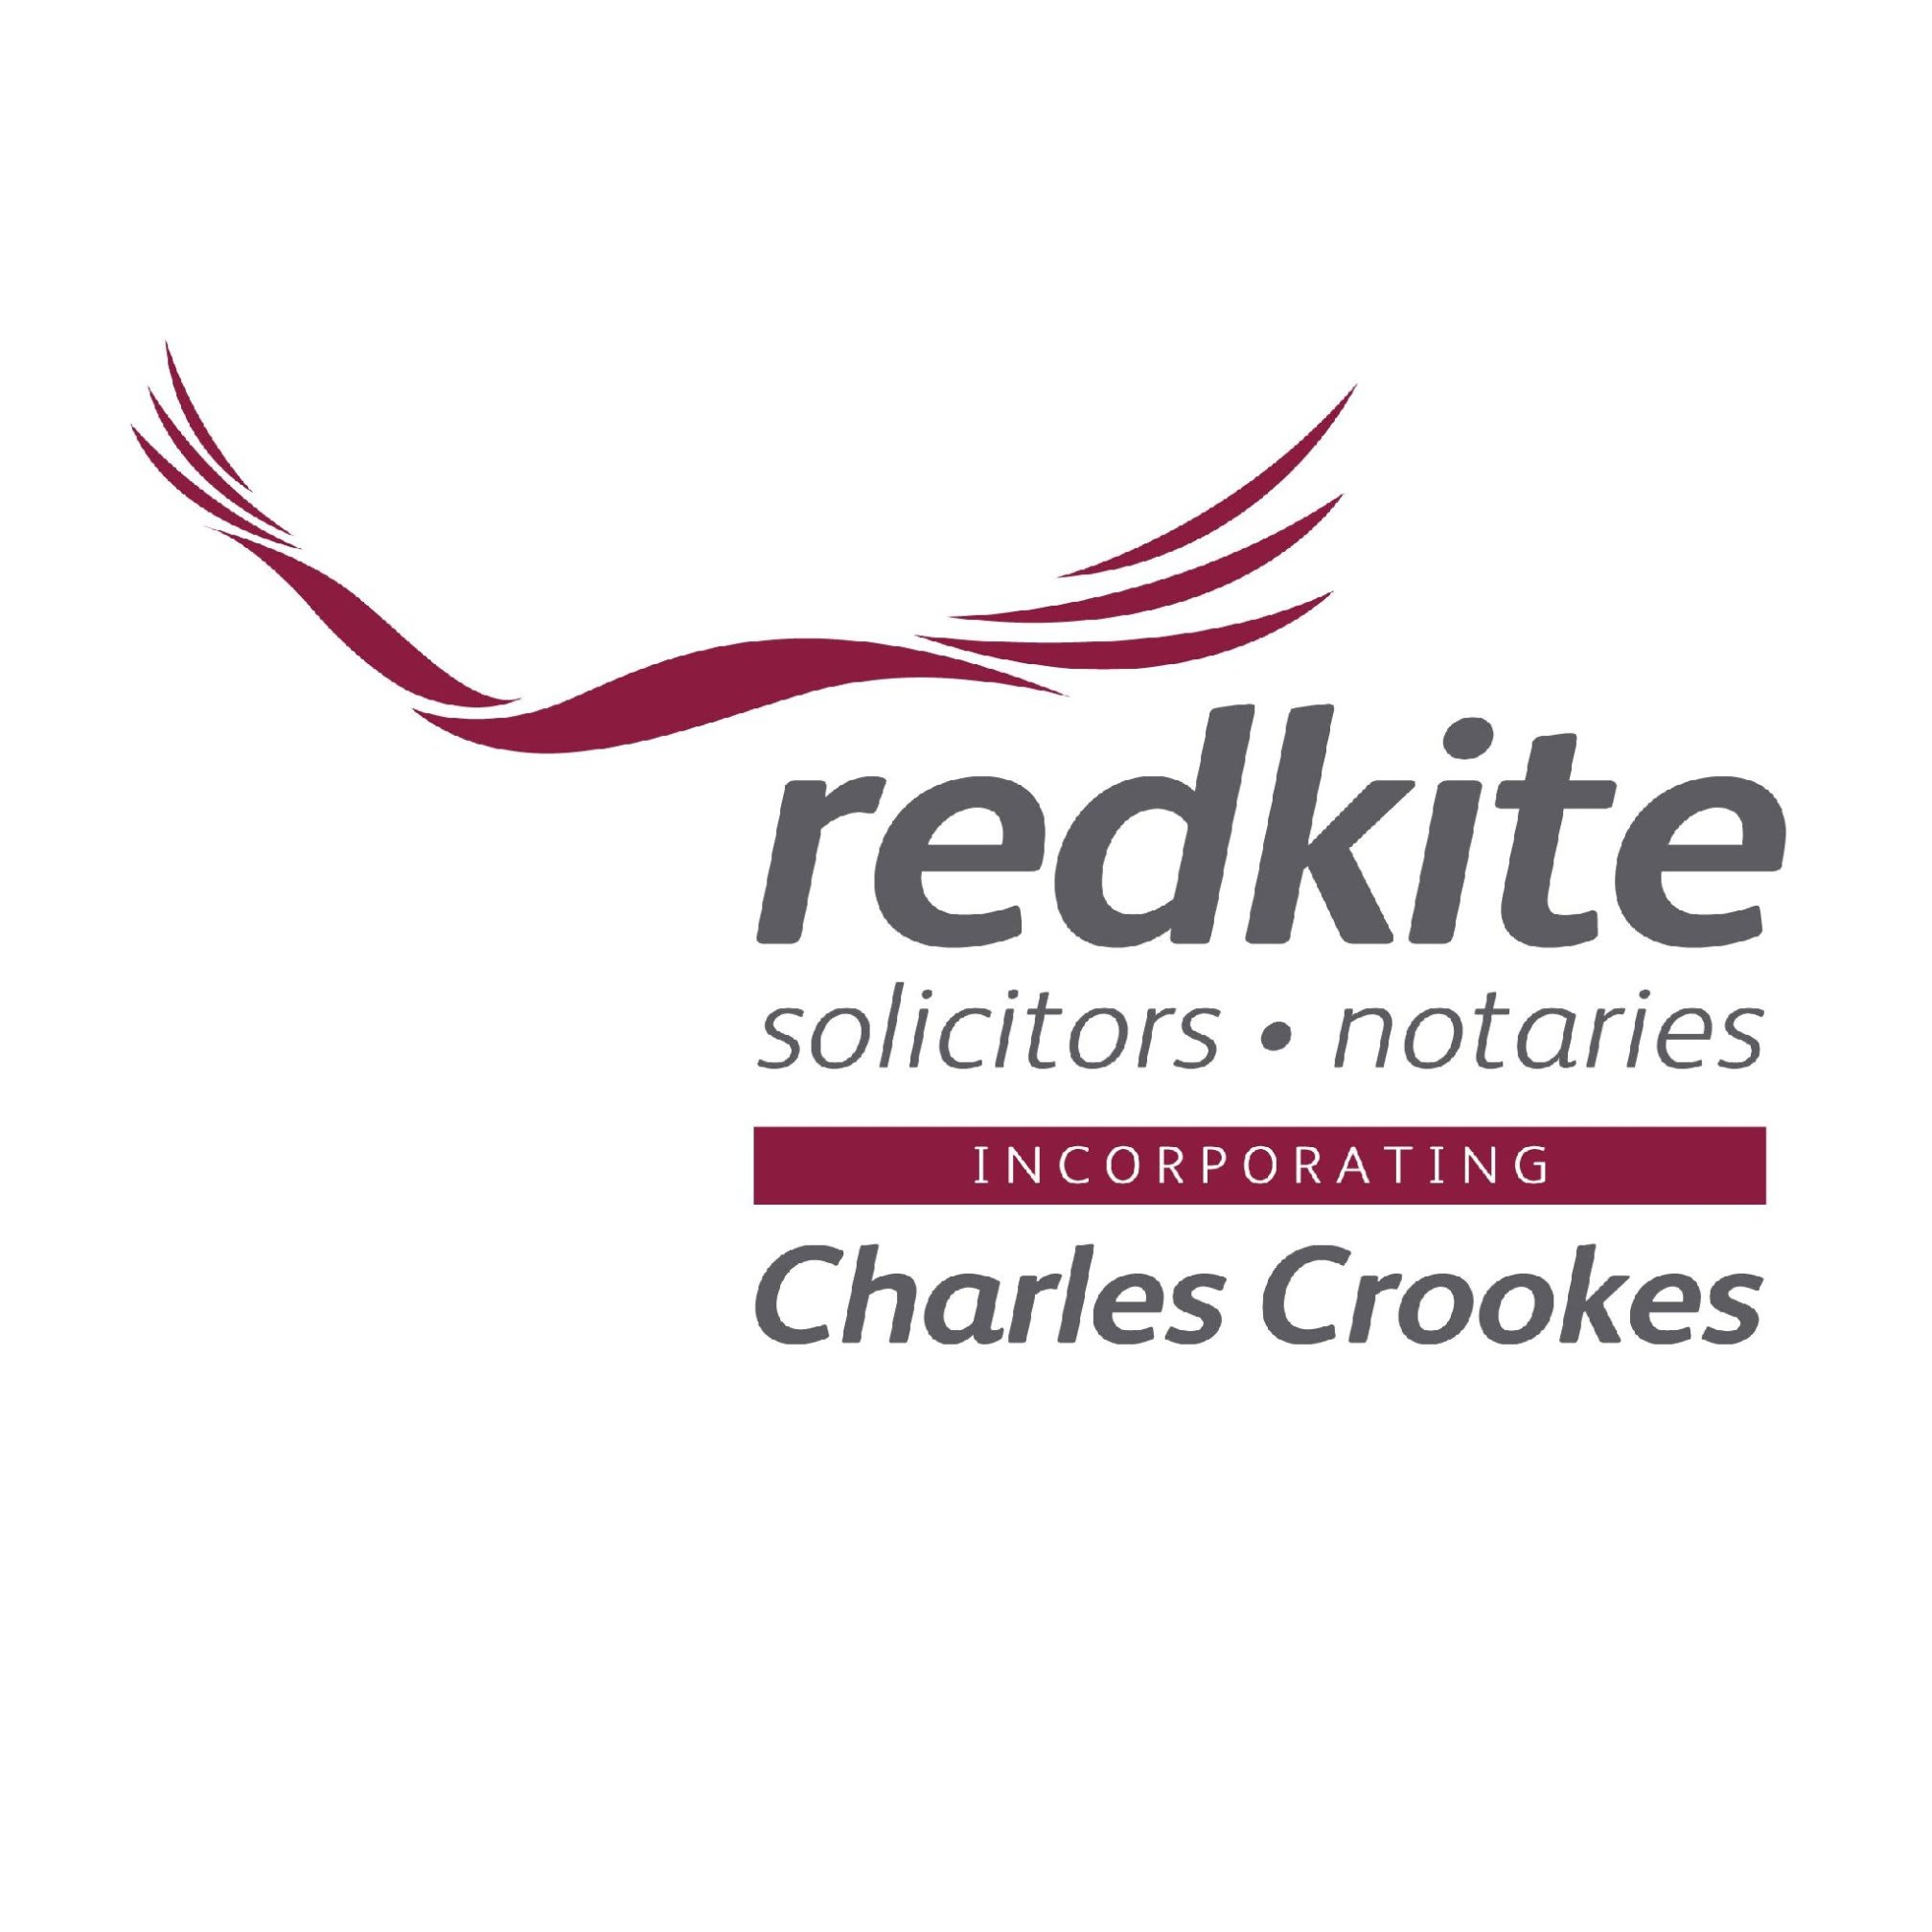 Redkite Solicitors - Cardiff, South Glamorgan CF24 3AB - 02920 491271 | ShowMeLocal.com